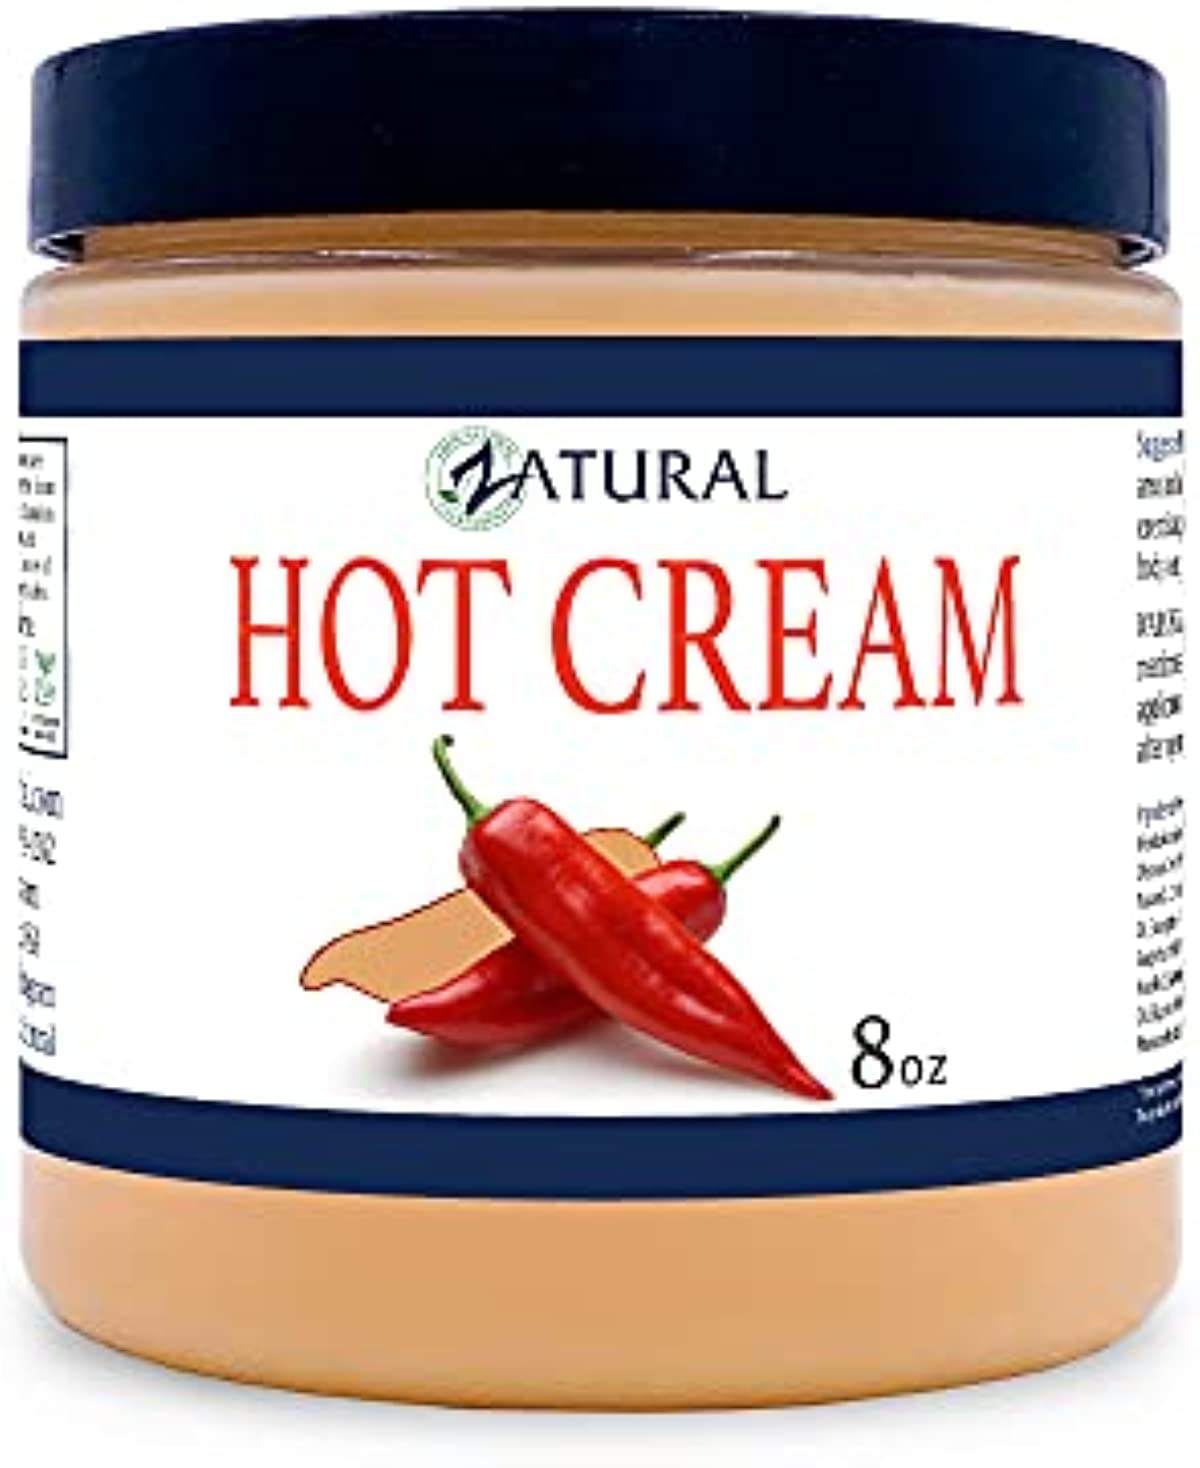 Organic Hot Cream-Cellulite Cream-Muscle Rub-Slimming Cream-Pain Relief-Body Wraps-Belly Fat-Skin Firming & Weight Loss-Professional Therapeutic Grade-Doctor Formulated (8 Ounce)